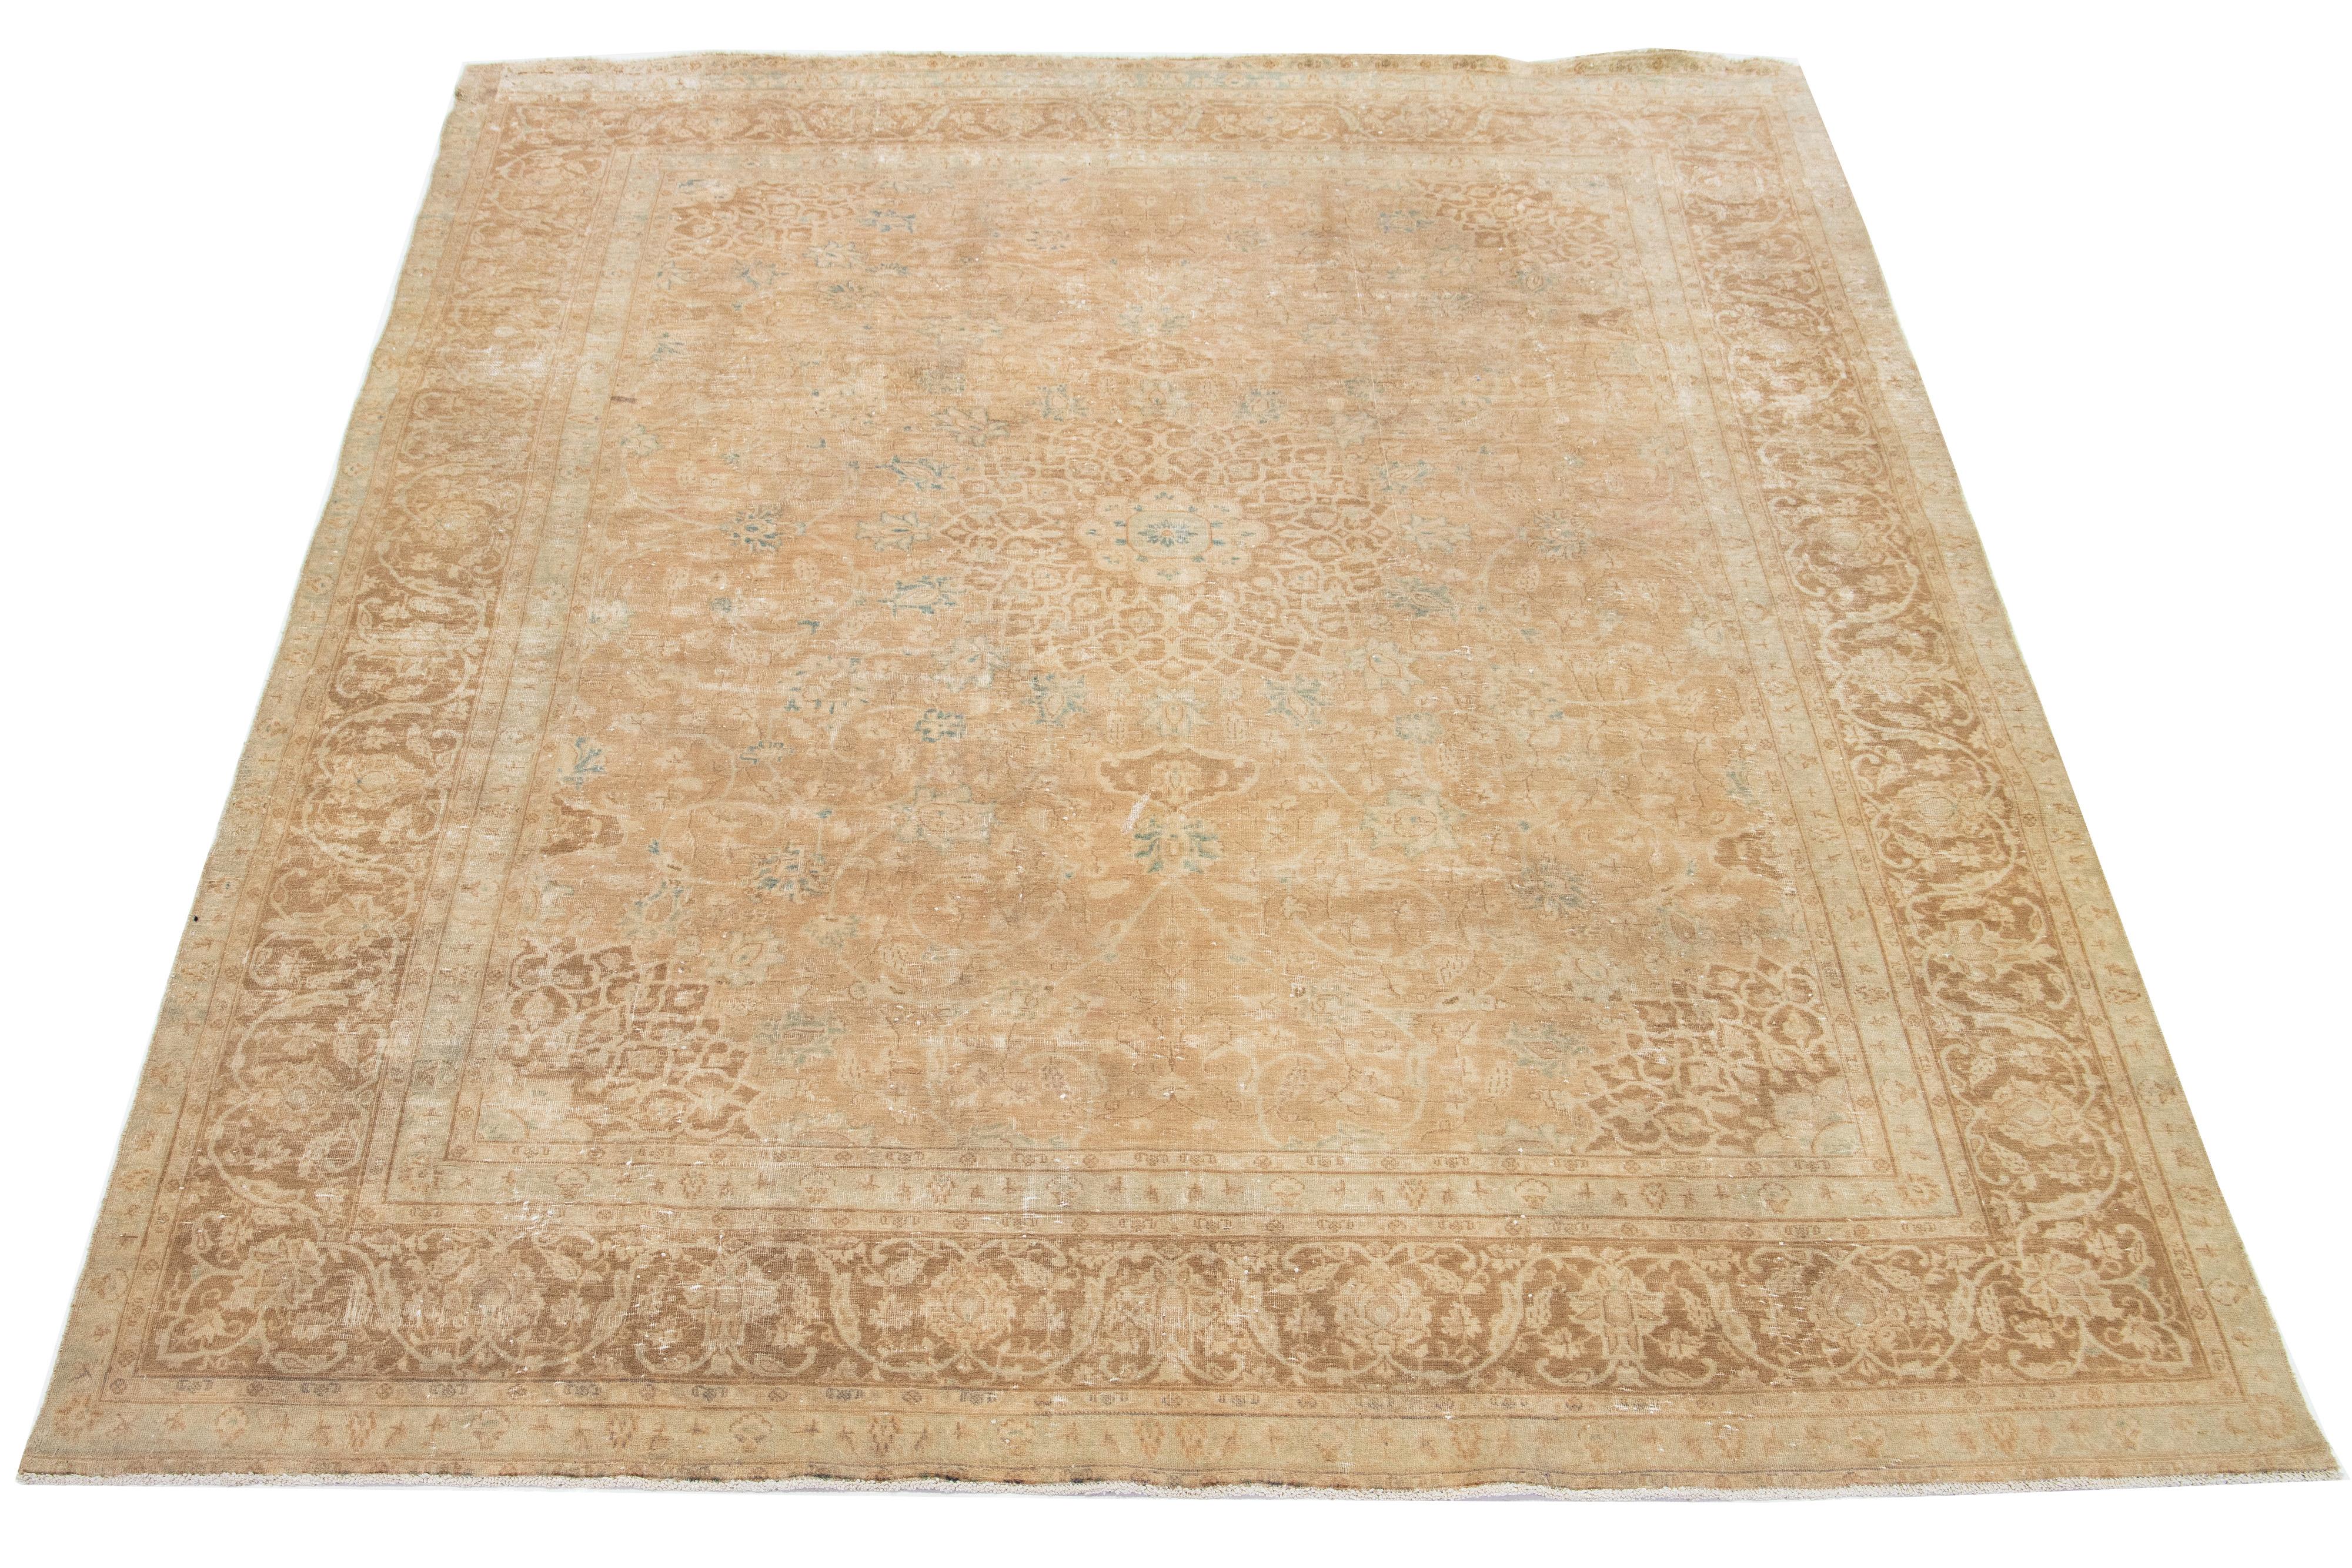  This Persian wool rug features a tan color field with blue accents in a classic rosette design. 

This rug measures 8'11